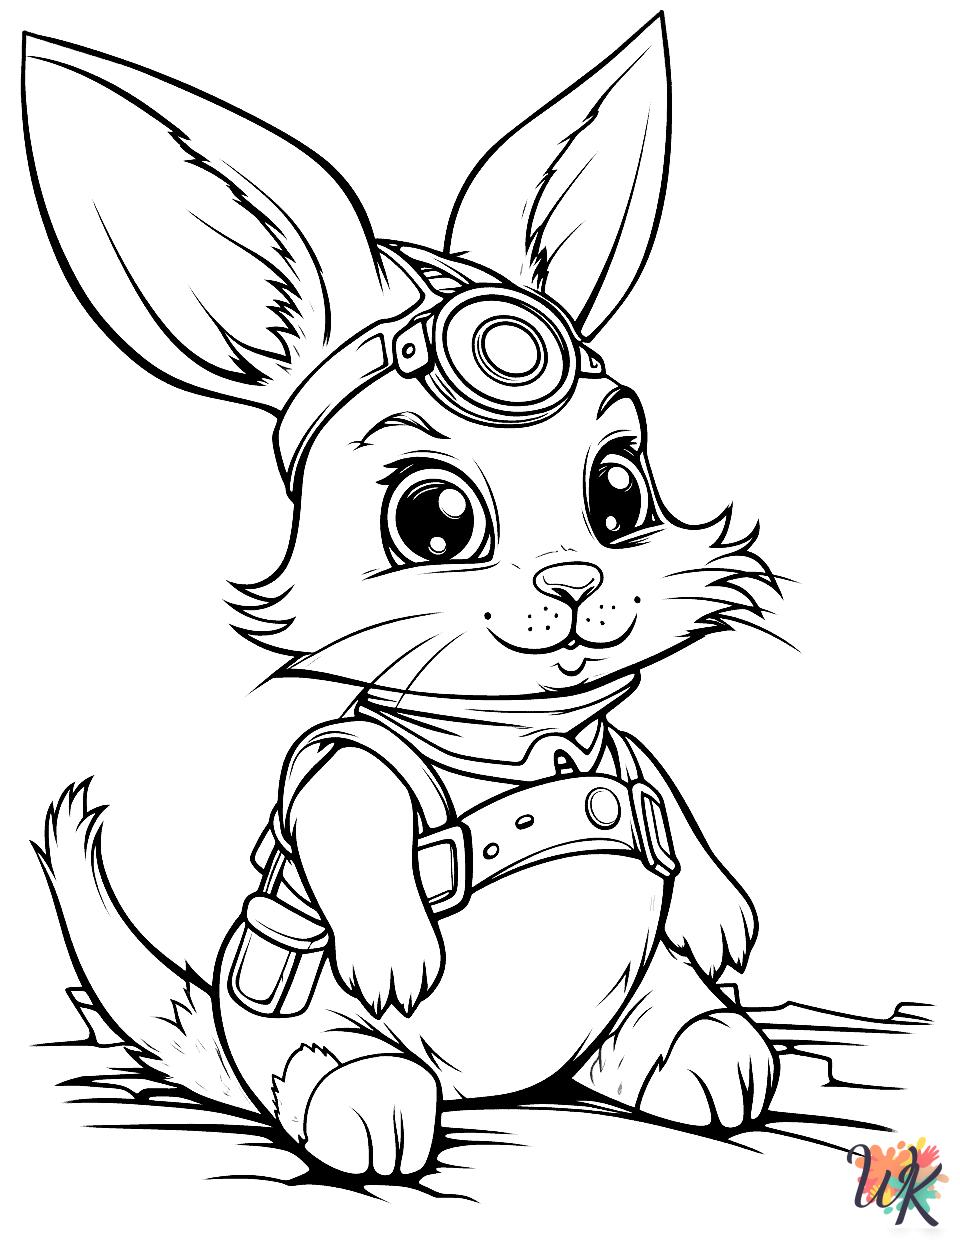 Rabbits ornaments coloring pages